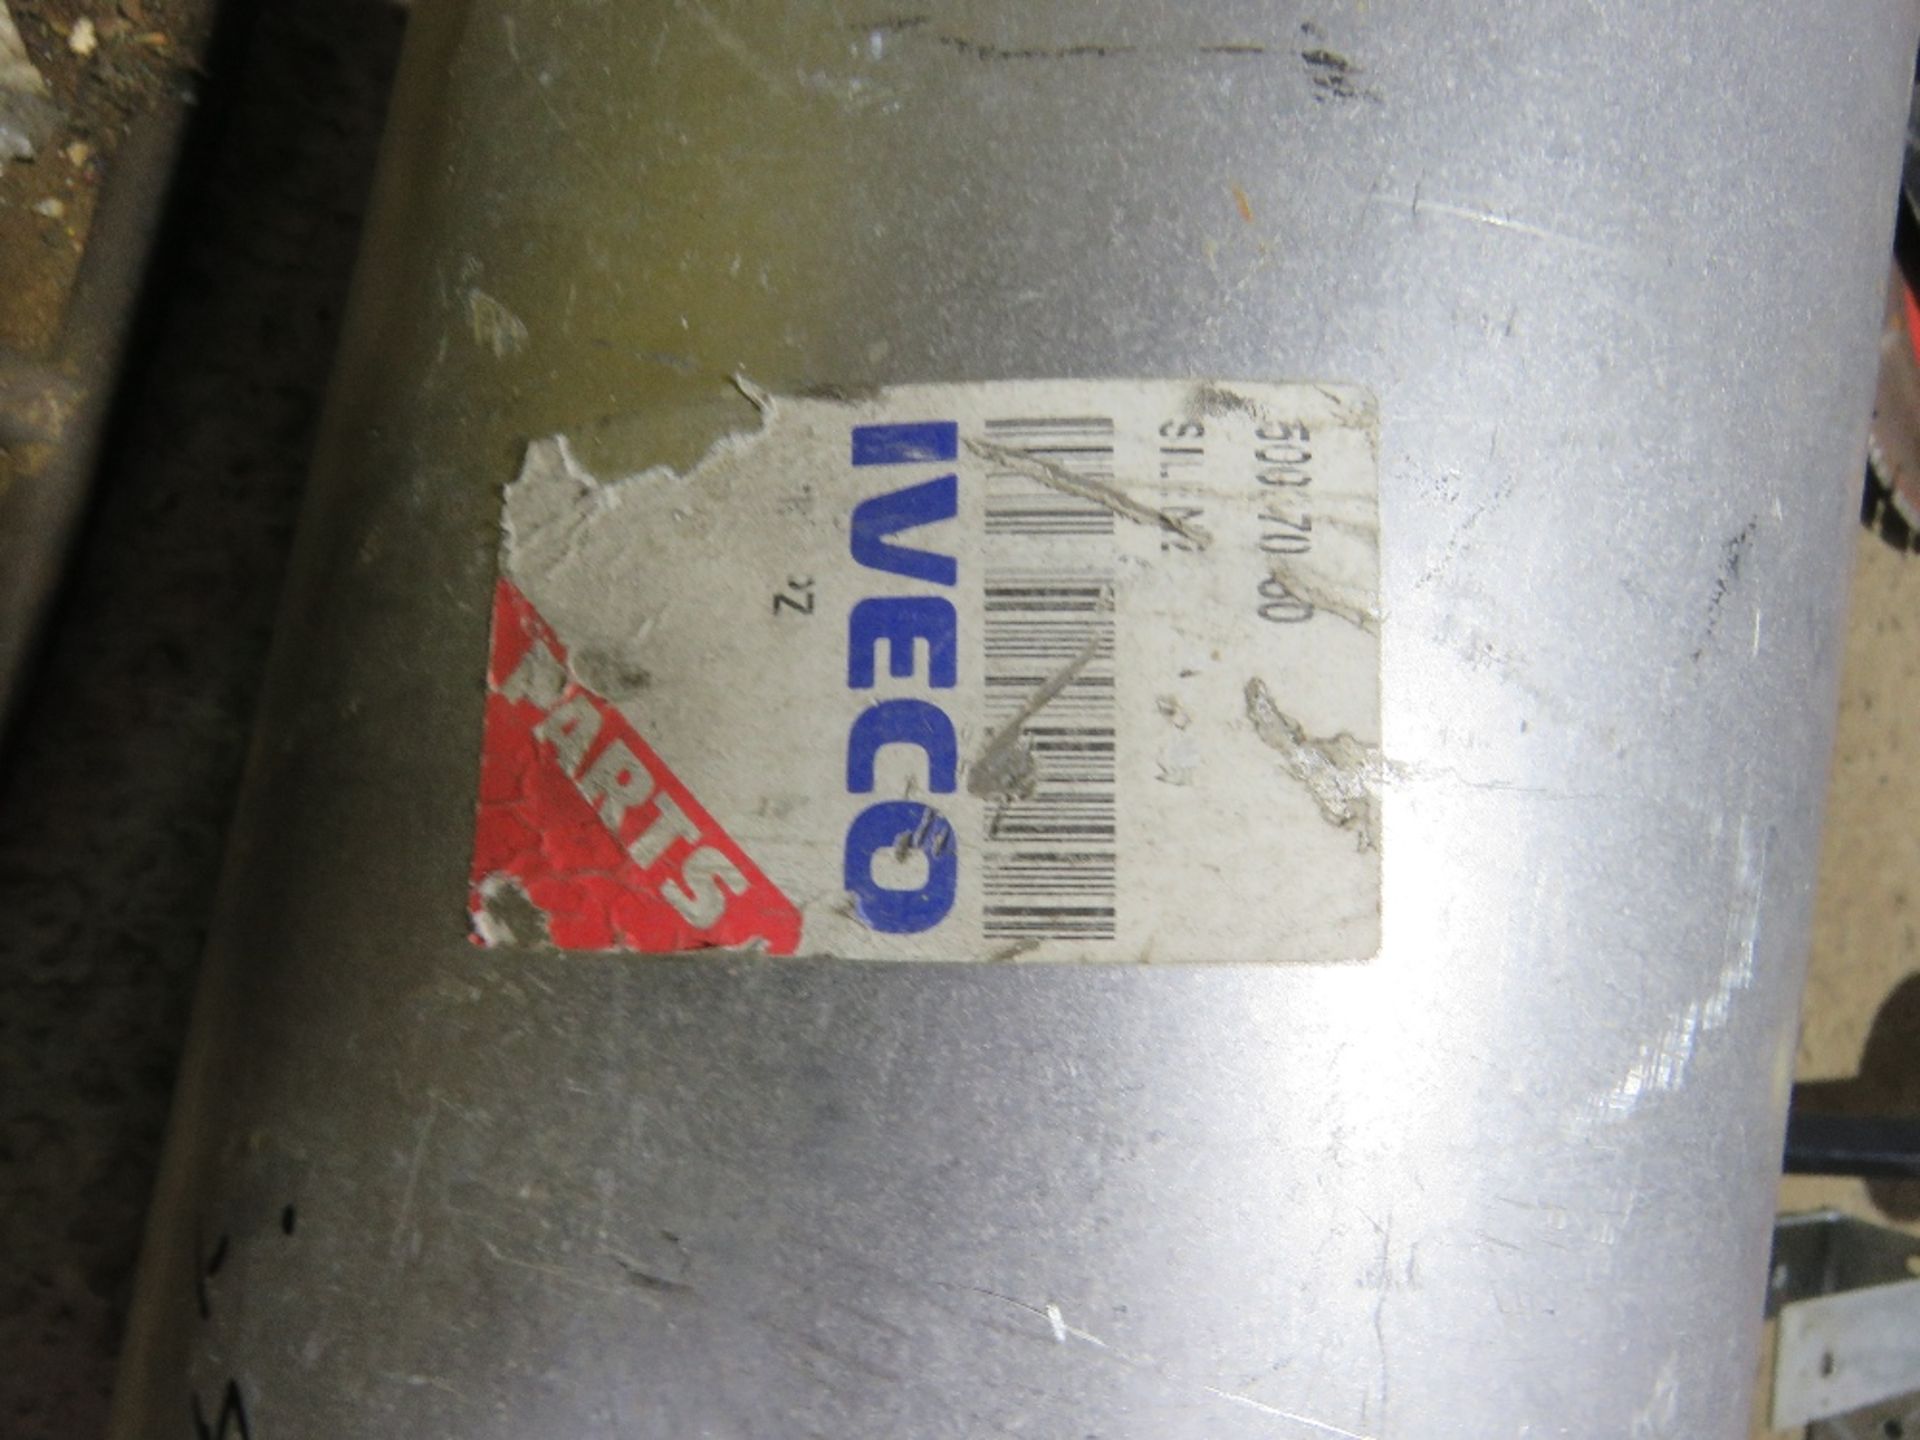 IVECO TECTOR 7.5TONNE LORRY EXHAUST BOX, UNUSED. THIS LOT IS SOLD UNDER THE AUCTIONEERS MARGIN SC - Image 2 of 3